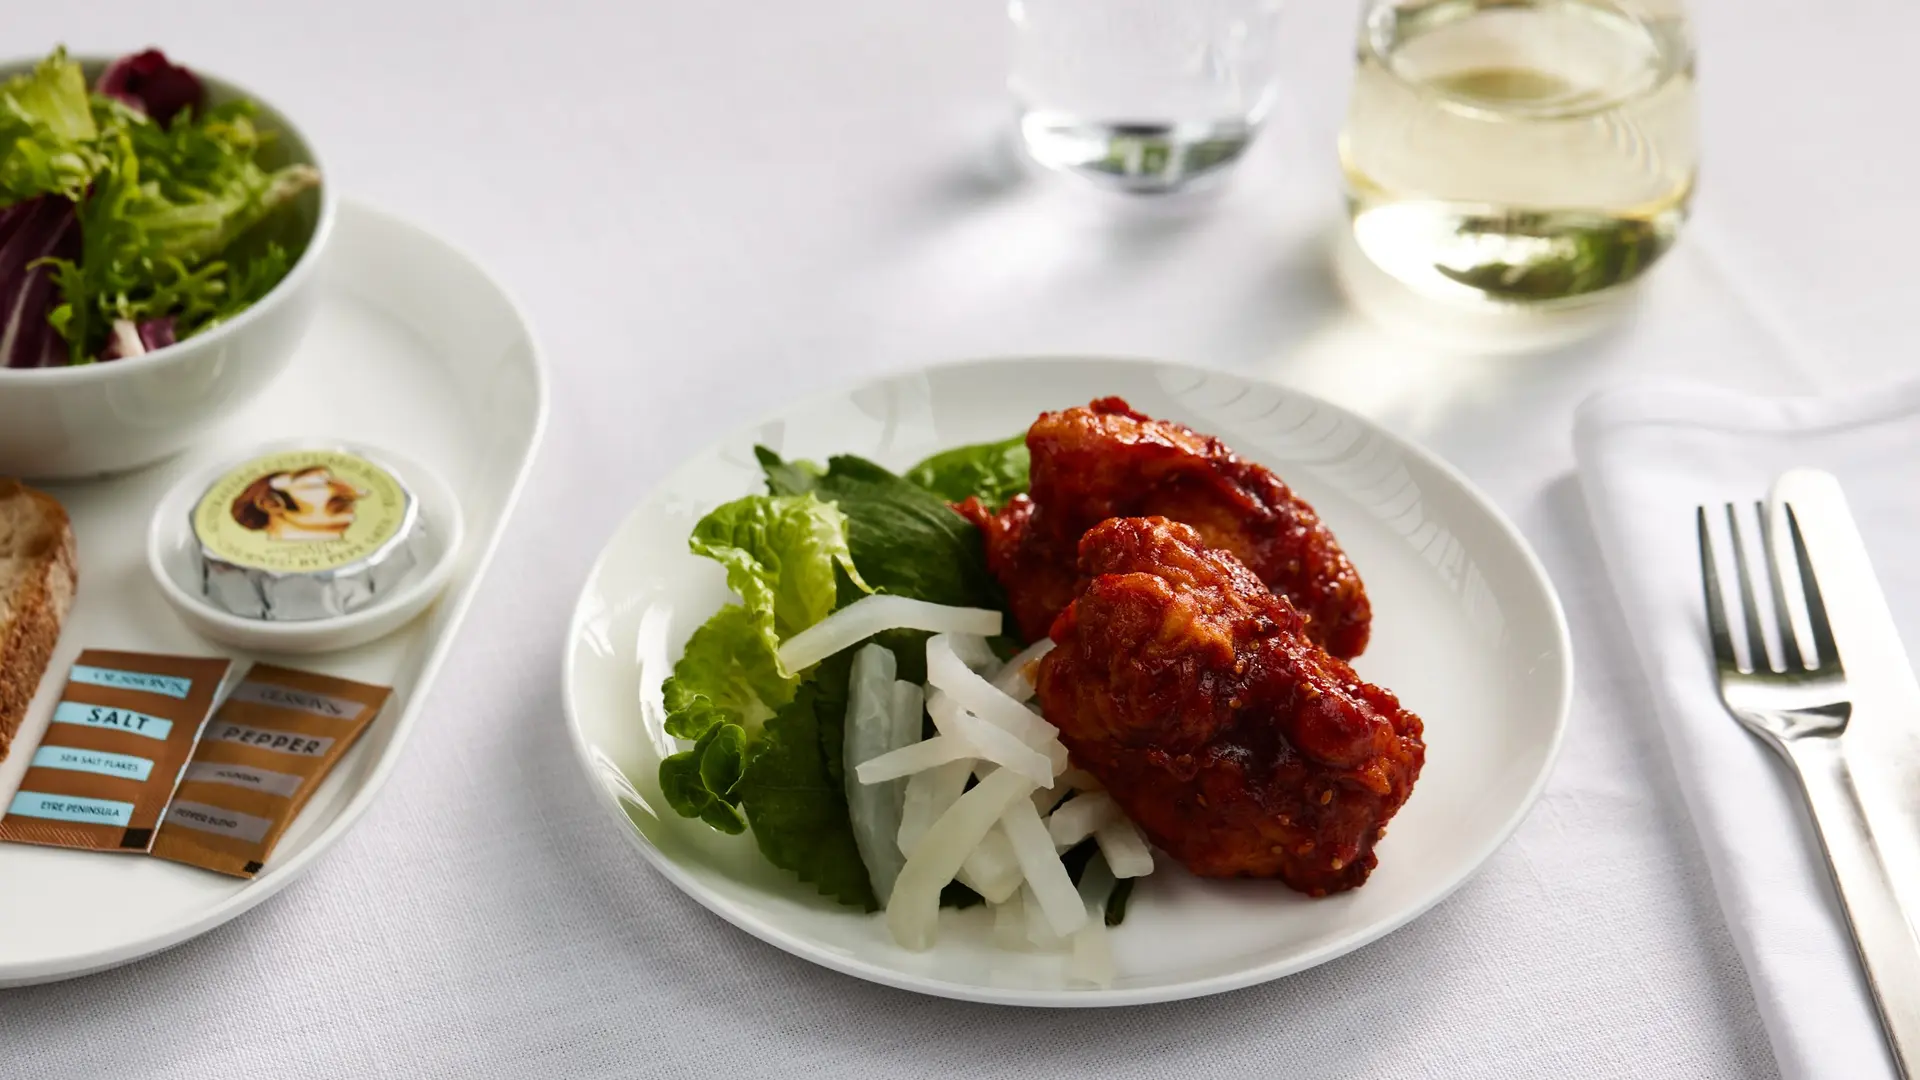 Airlines News - Qantas - larger portions & new menus - inflight & lounges